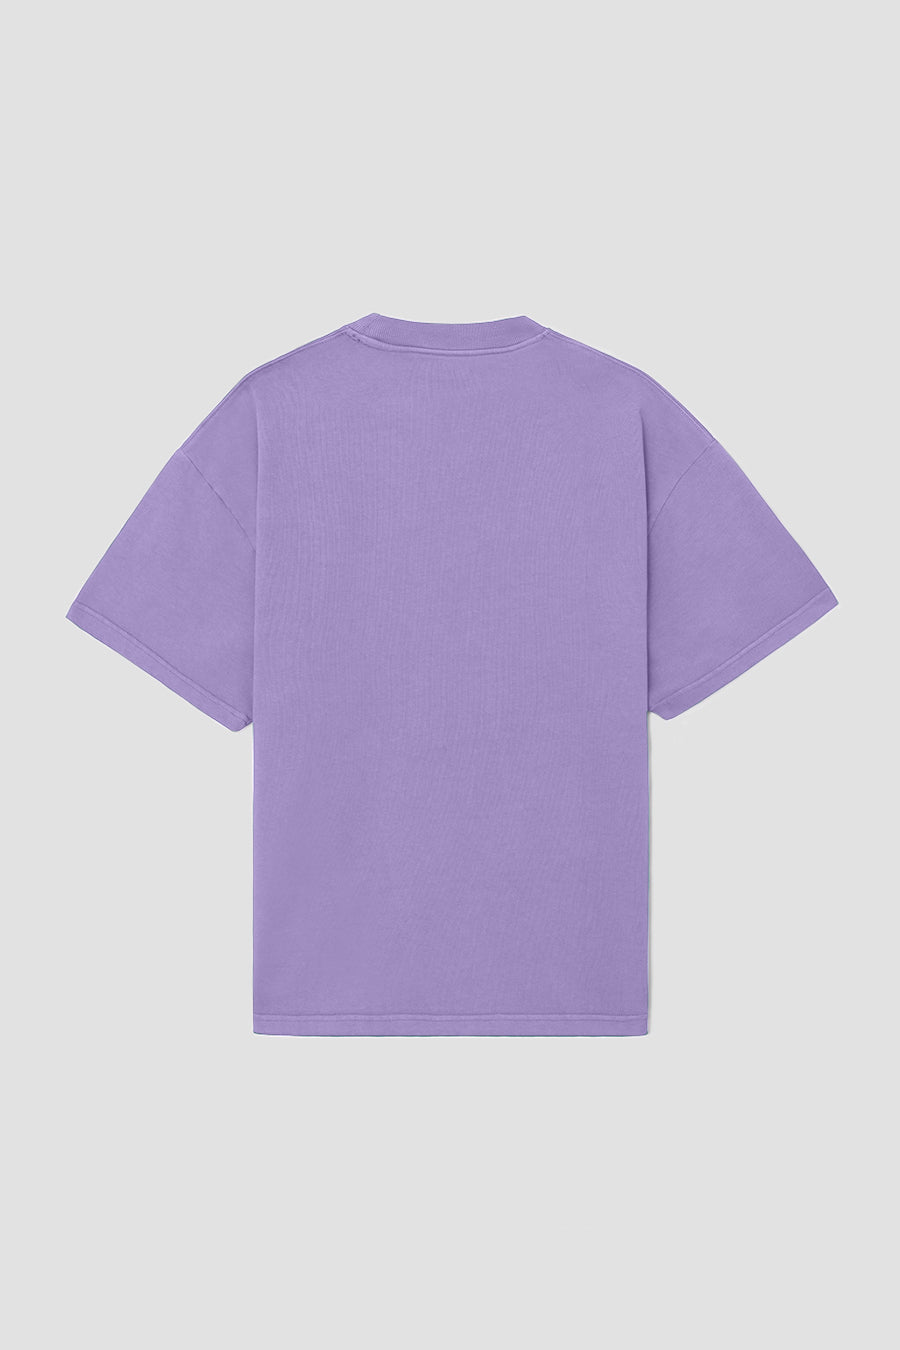 Purple T-Shirt - only available in wholesale